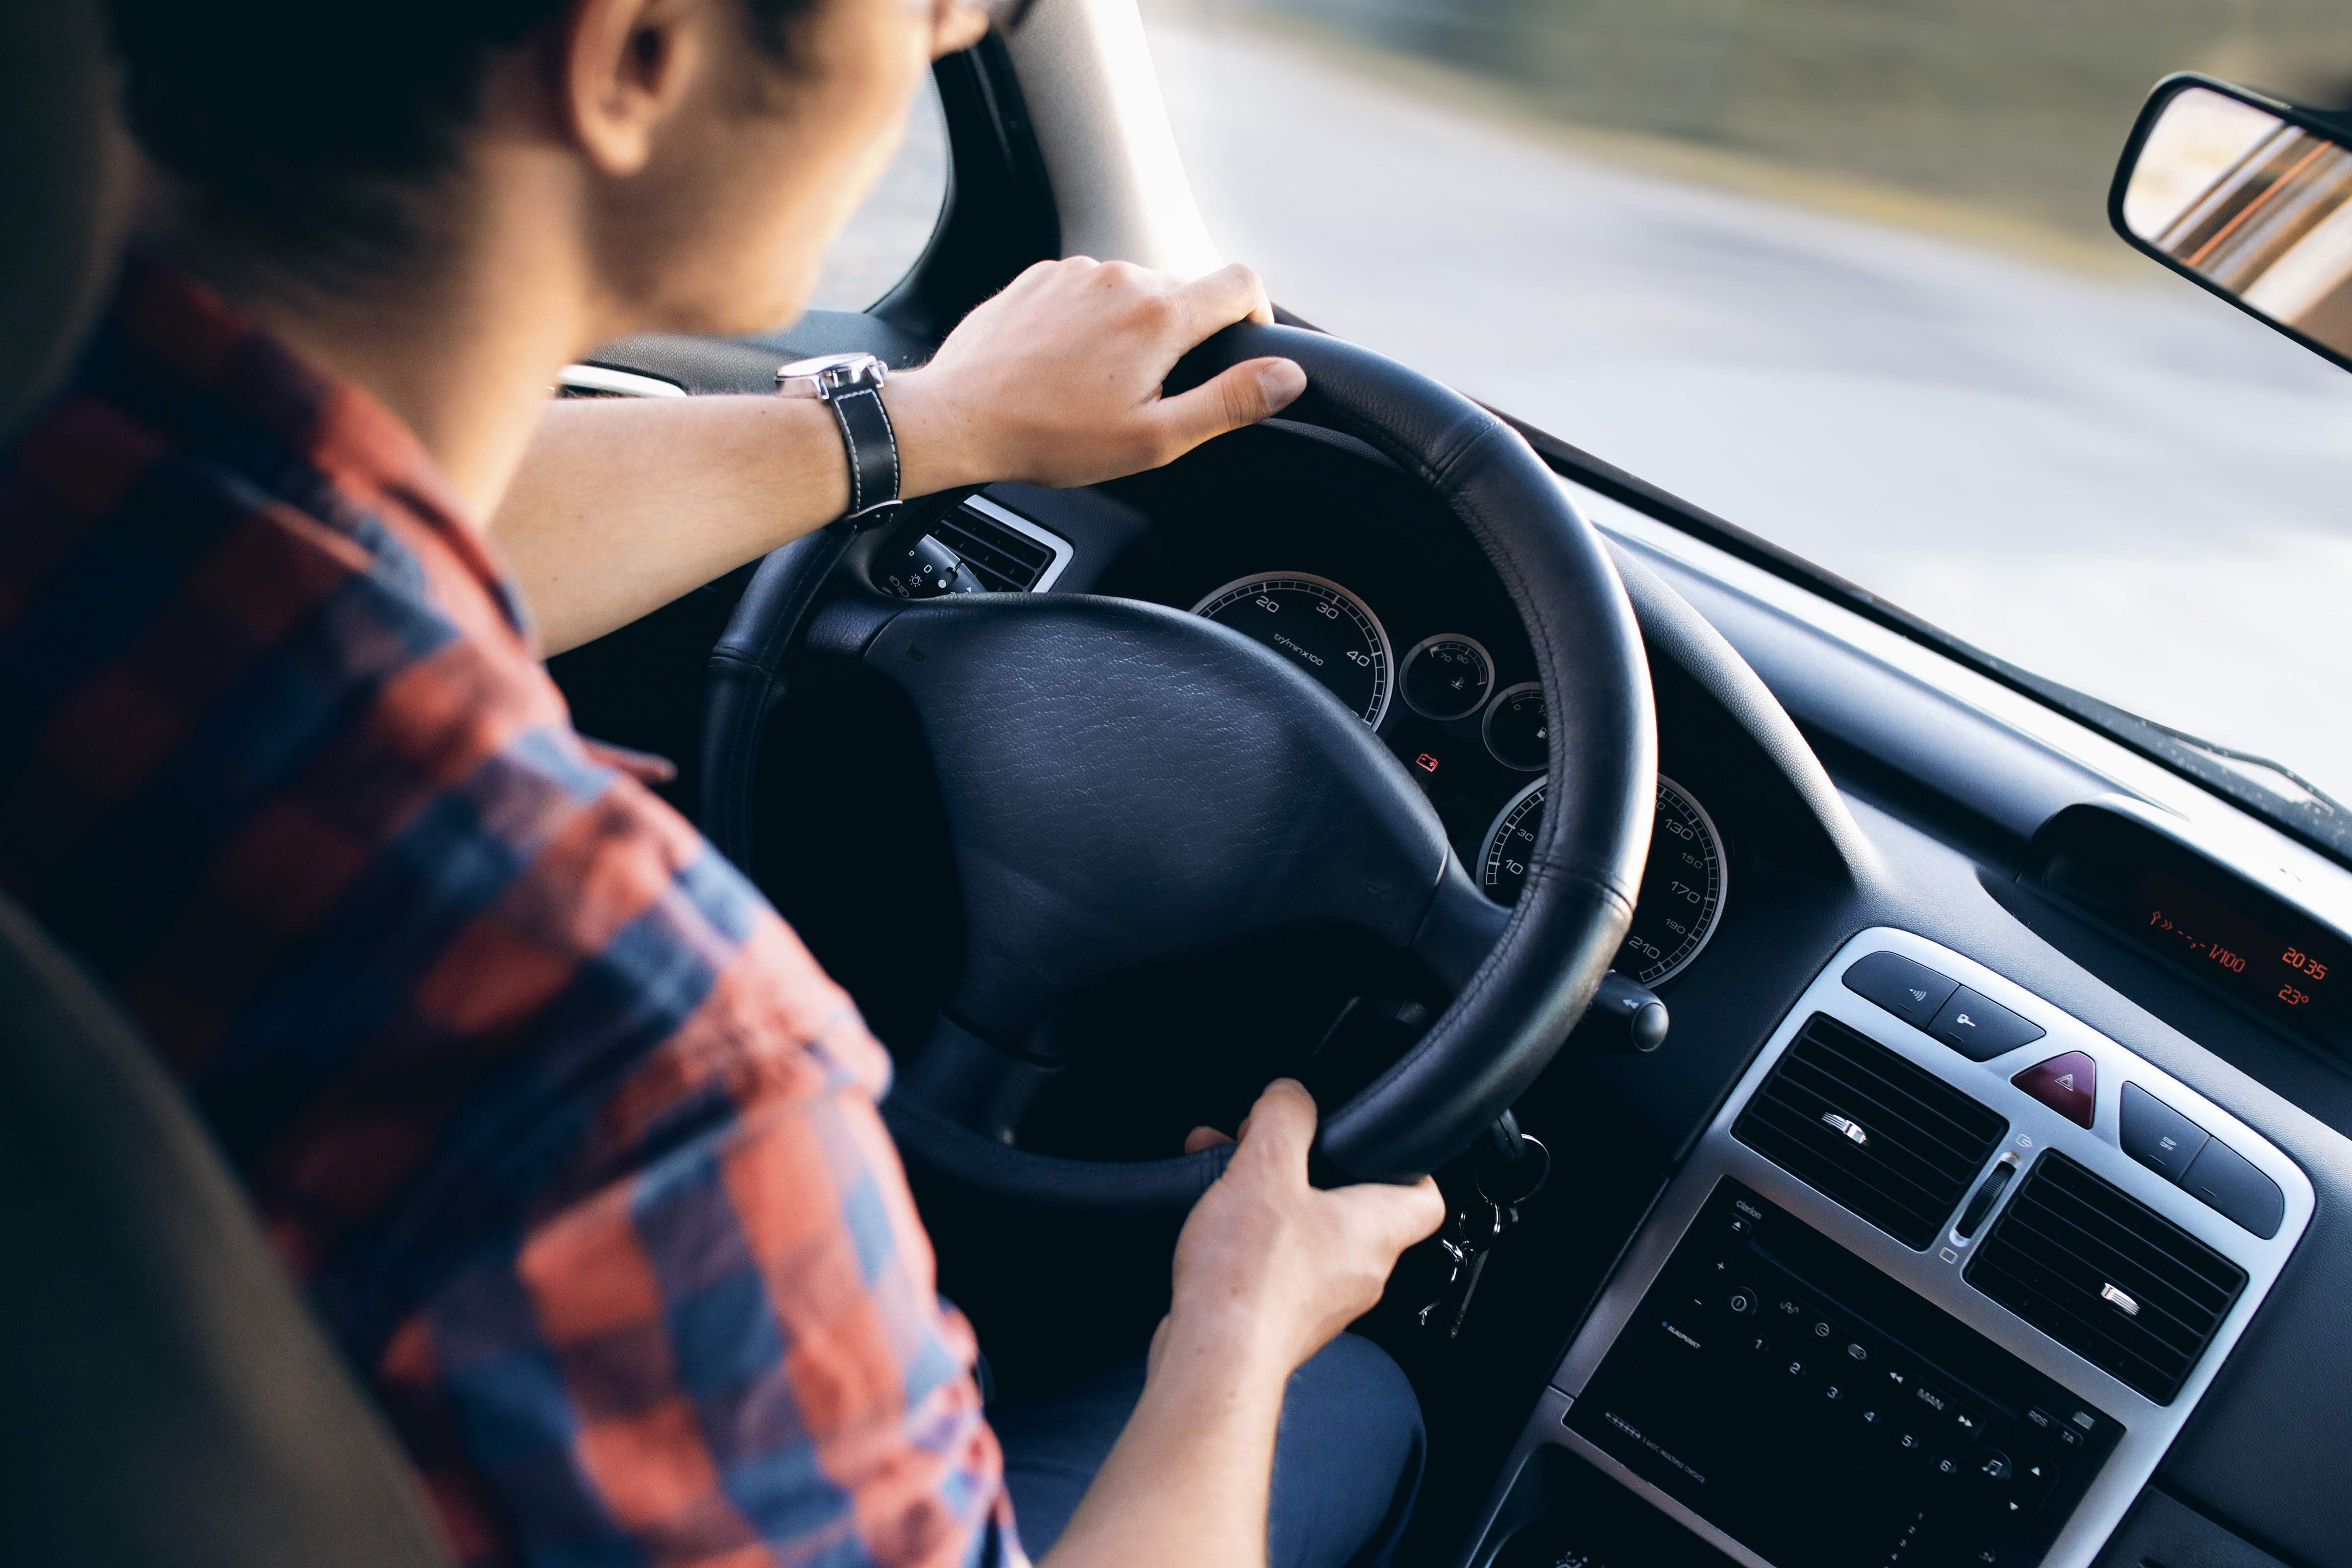 The constant busy schedule that many Americans keep is one of the leading reasons why so many drivers eat behind the wheel.